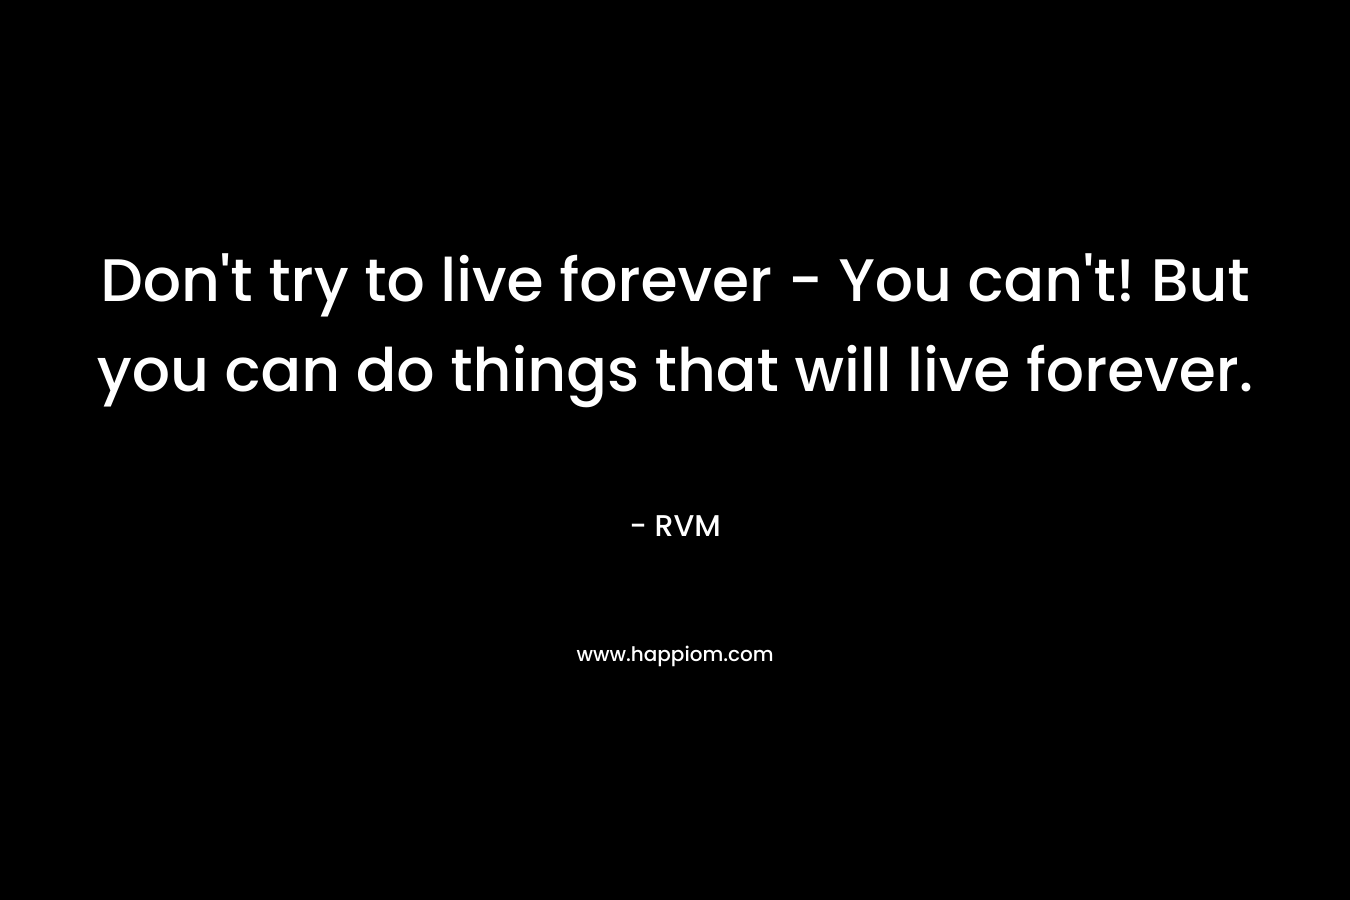 Don't try to live forever - You can't! But you can do things that will live forever.